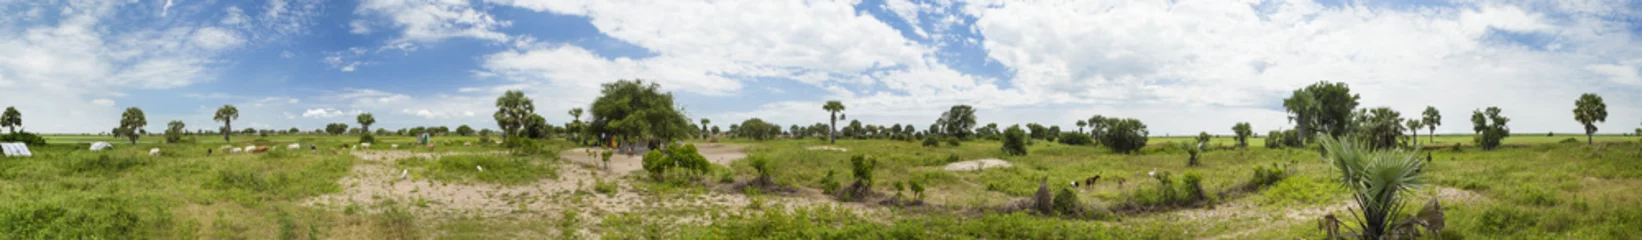 Outdoor-Kissen 360 seamless panorama of South Sudan © Wollwerth Imagery